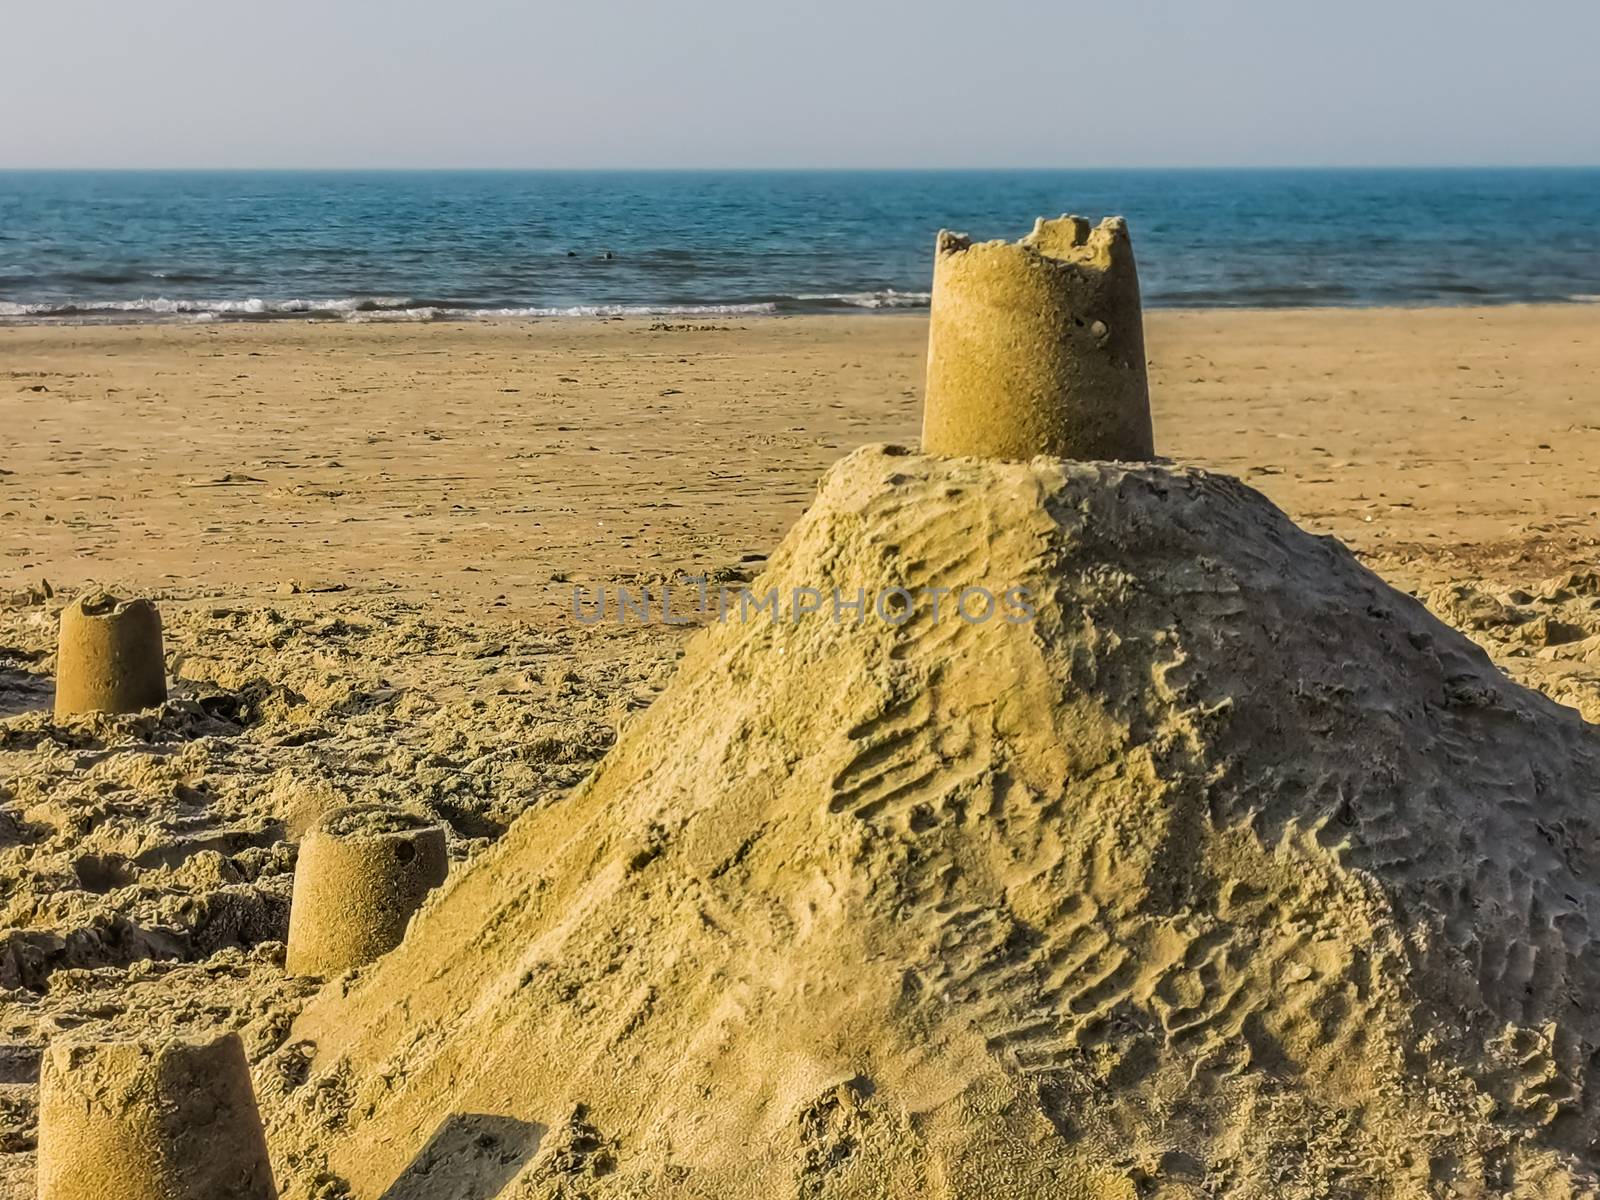 close up of a sand castle building on the beach, summer season and holiday background